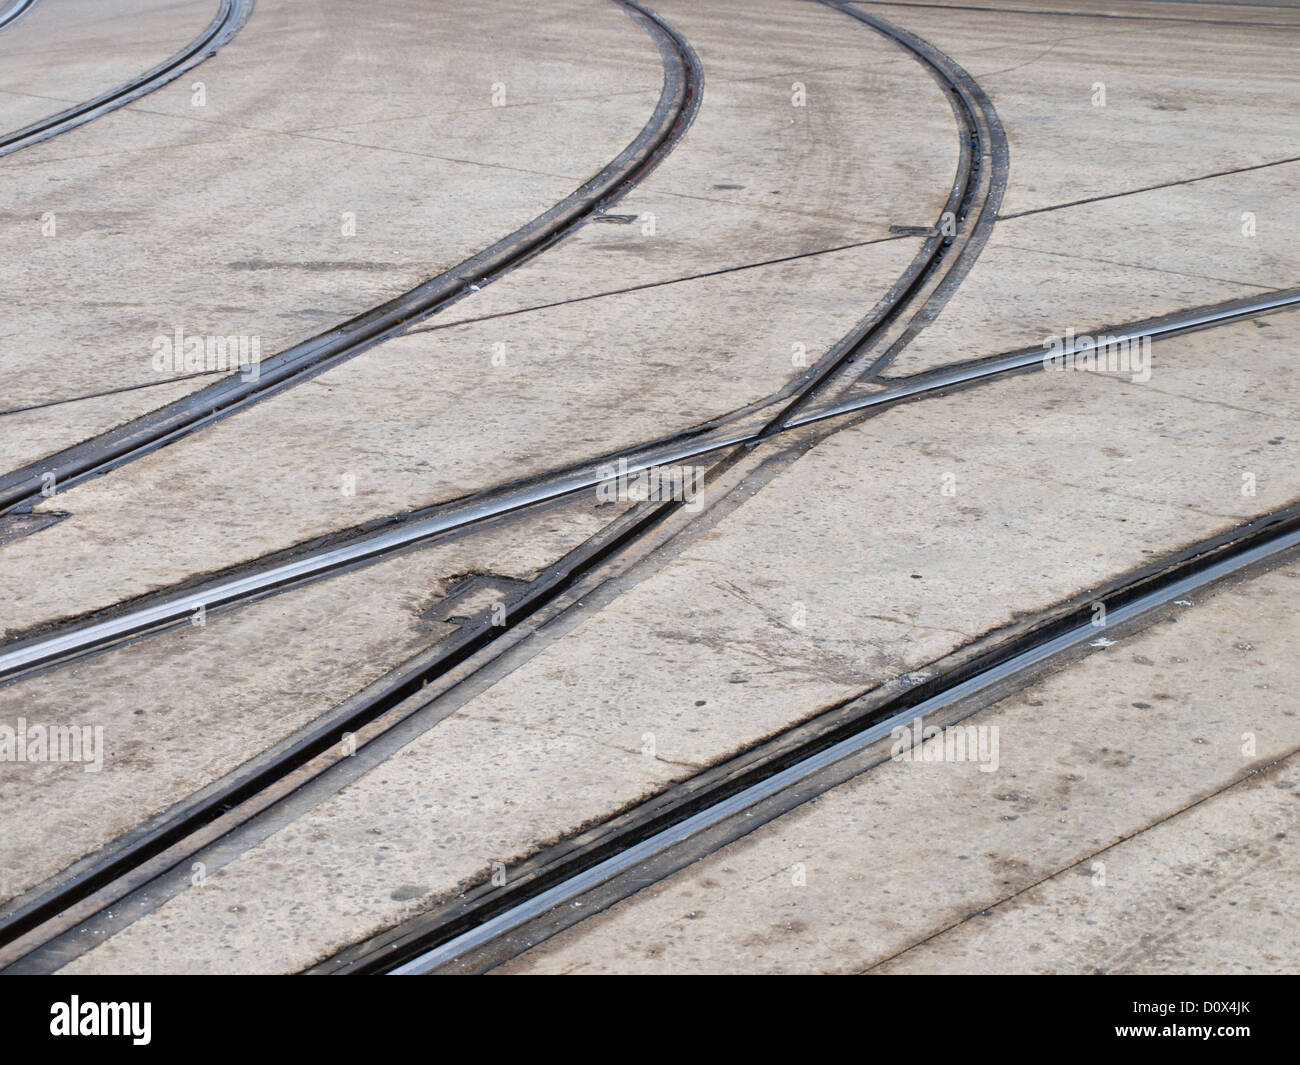 Intersecting tram tracks making patters in the concrete road surface in Oslo Norway Stock Photo